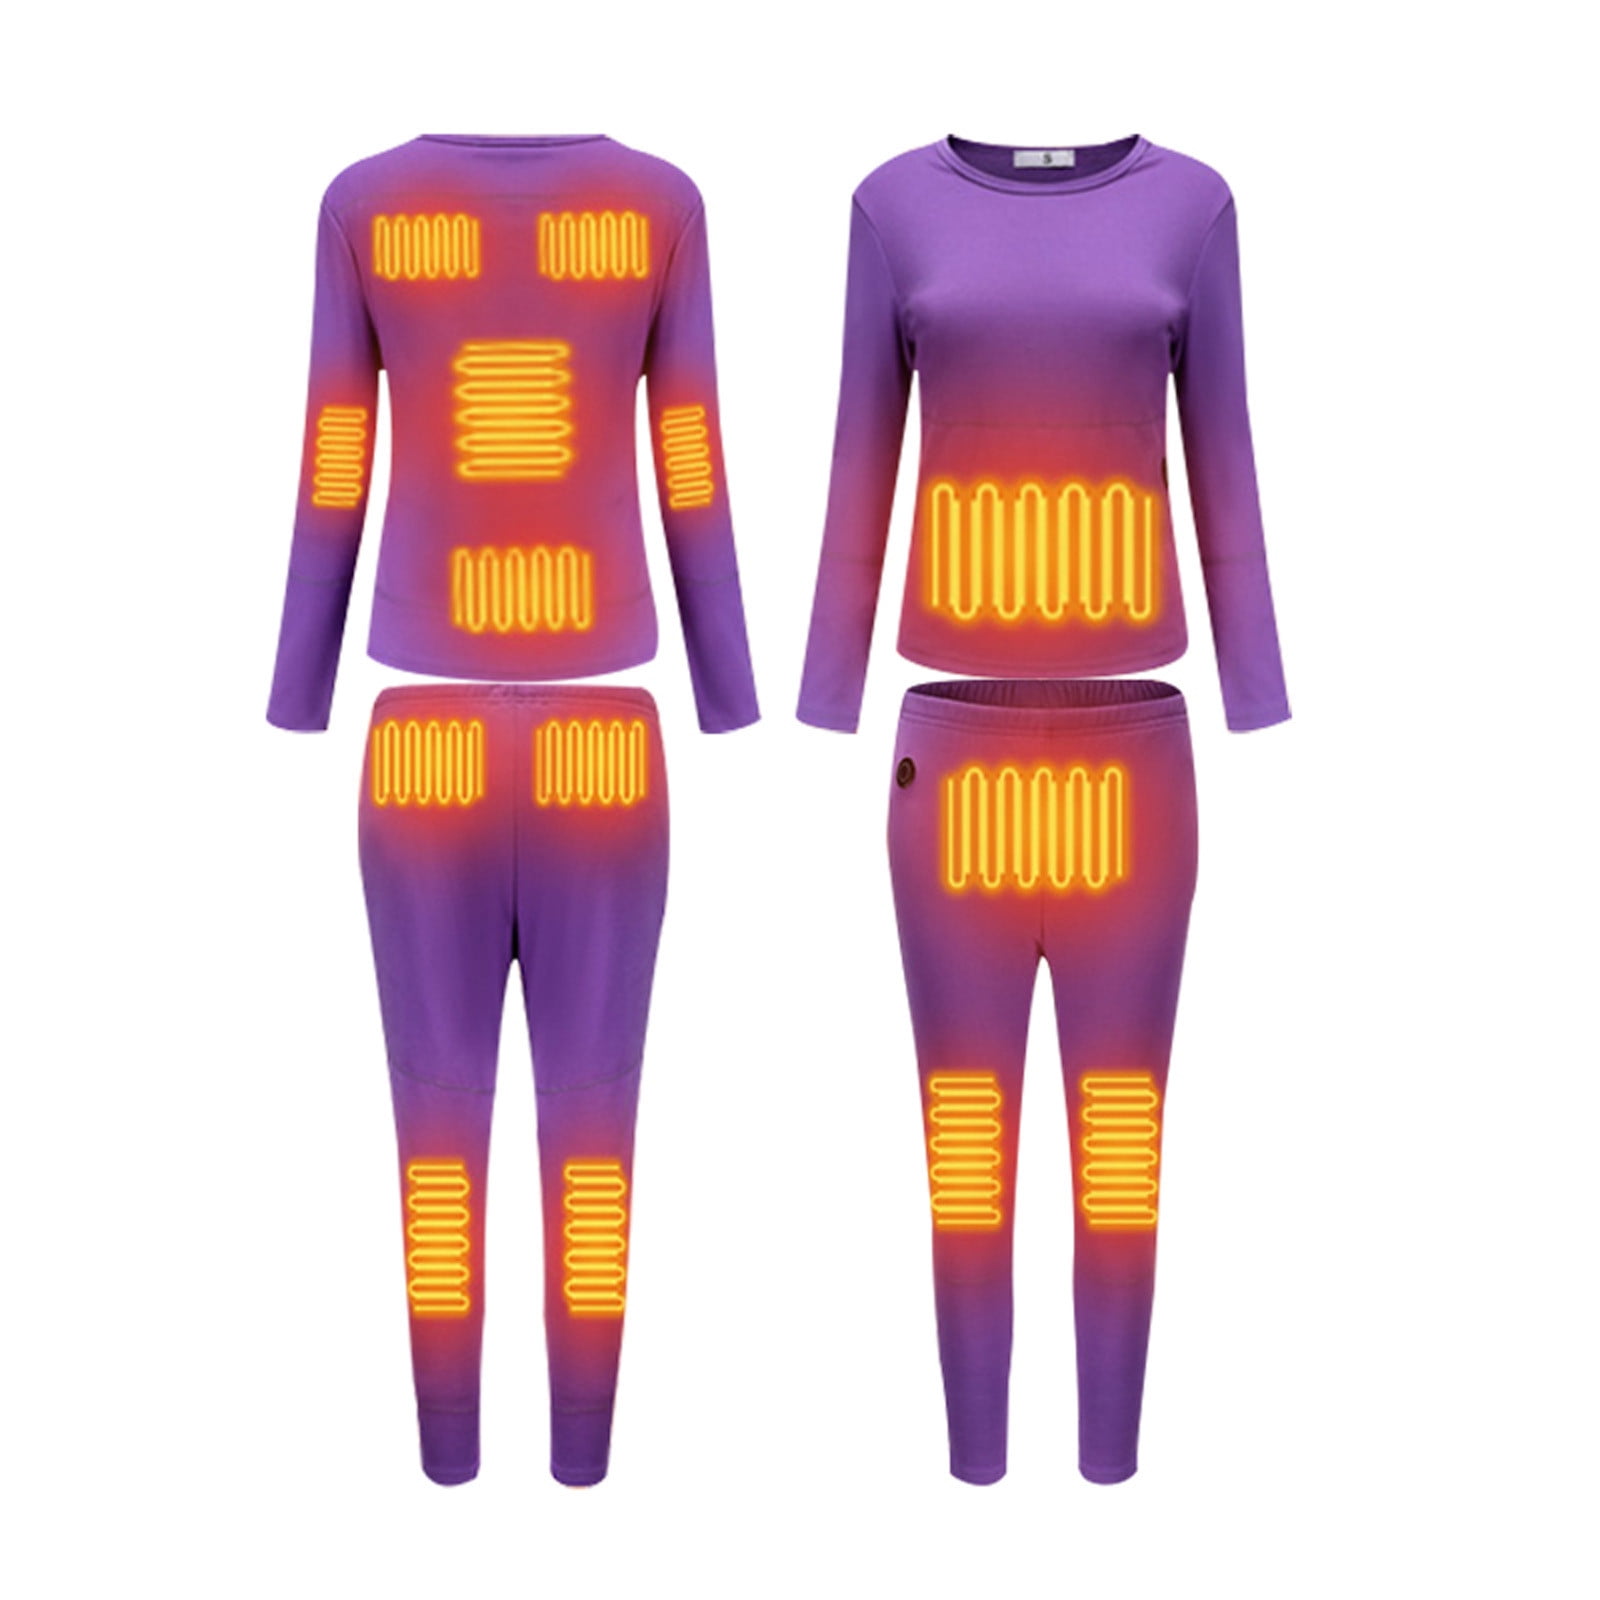 Best Deal for Electric Heated Thermal Underwear Set for Women, 22